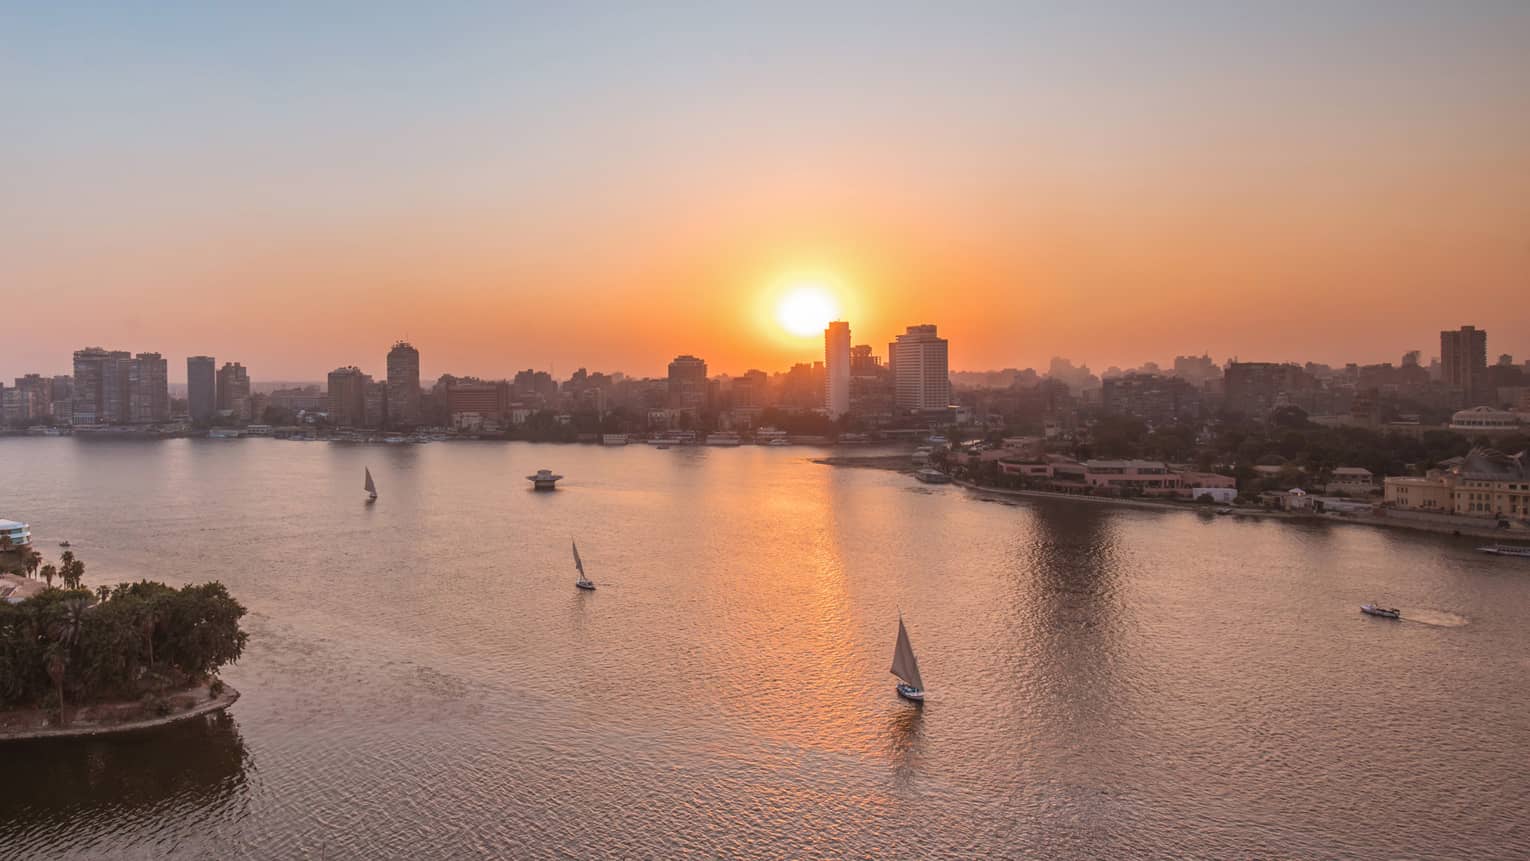 Sunset over Nile River with sailboats in Cairo, Egypt